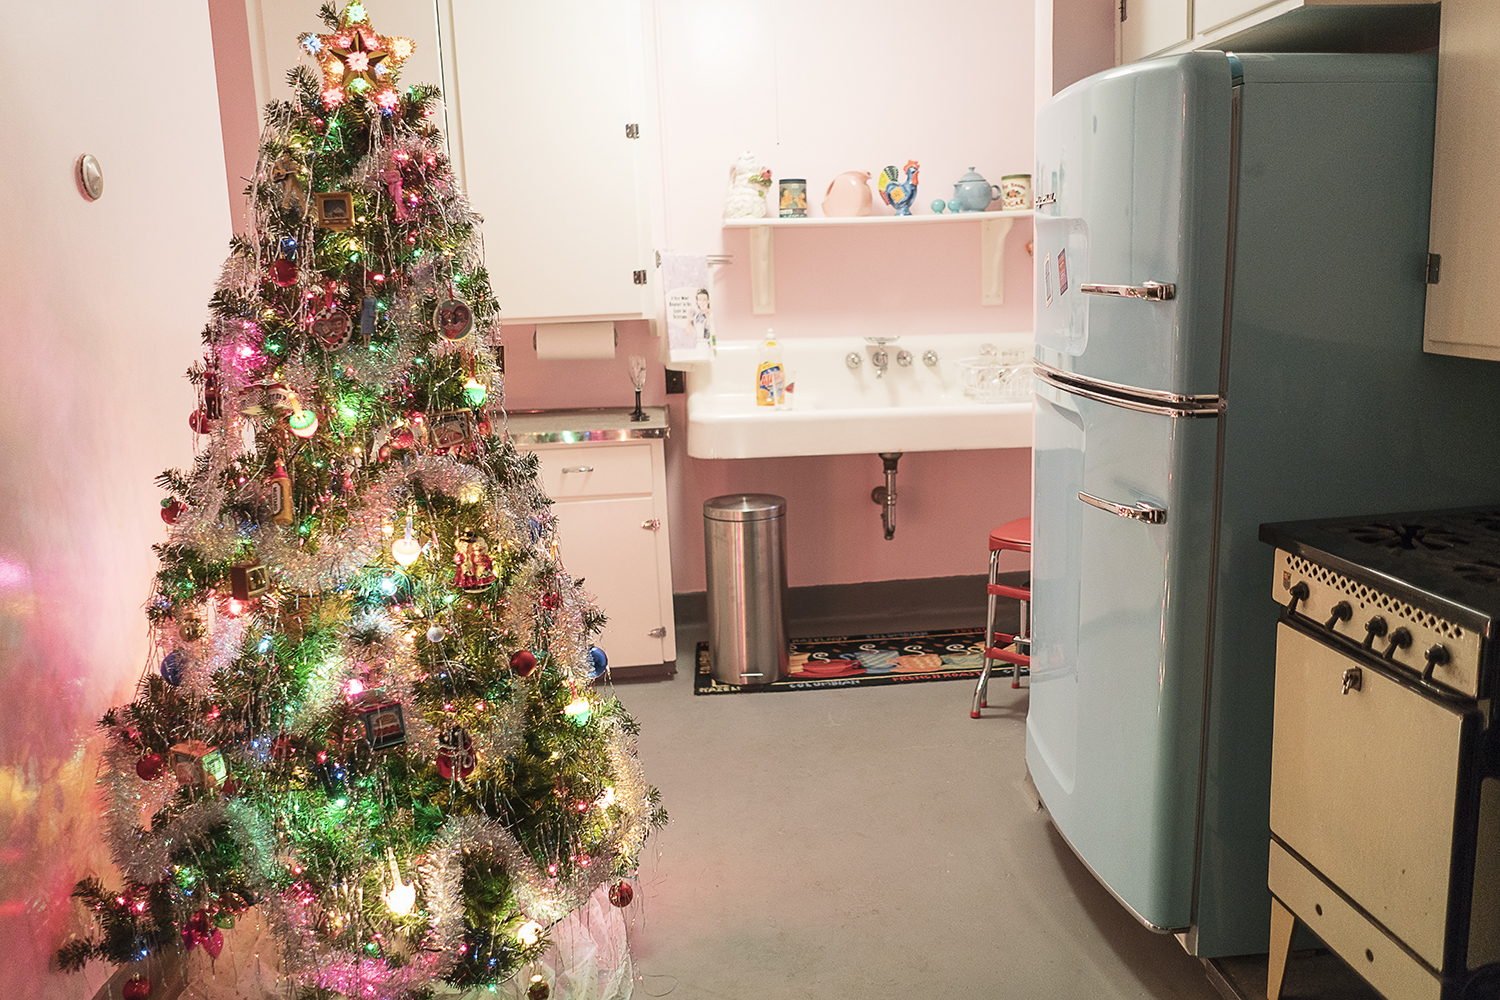 "The Lucy Tree" is brightly colored and adorned with silver tinsel in the 1950's themed kitchen in the basement of the Heddy home.